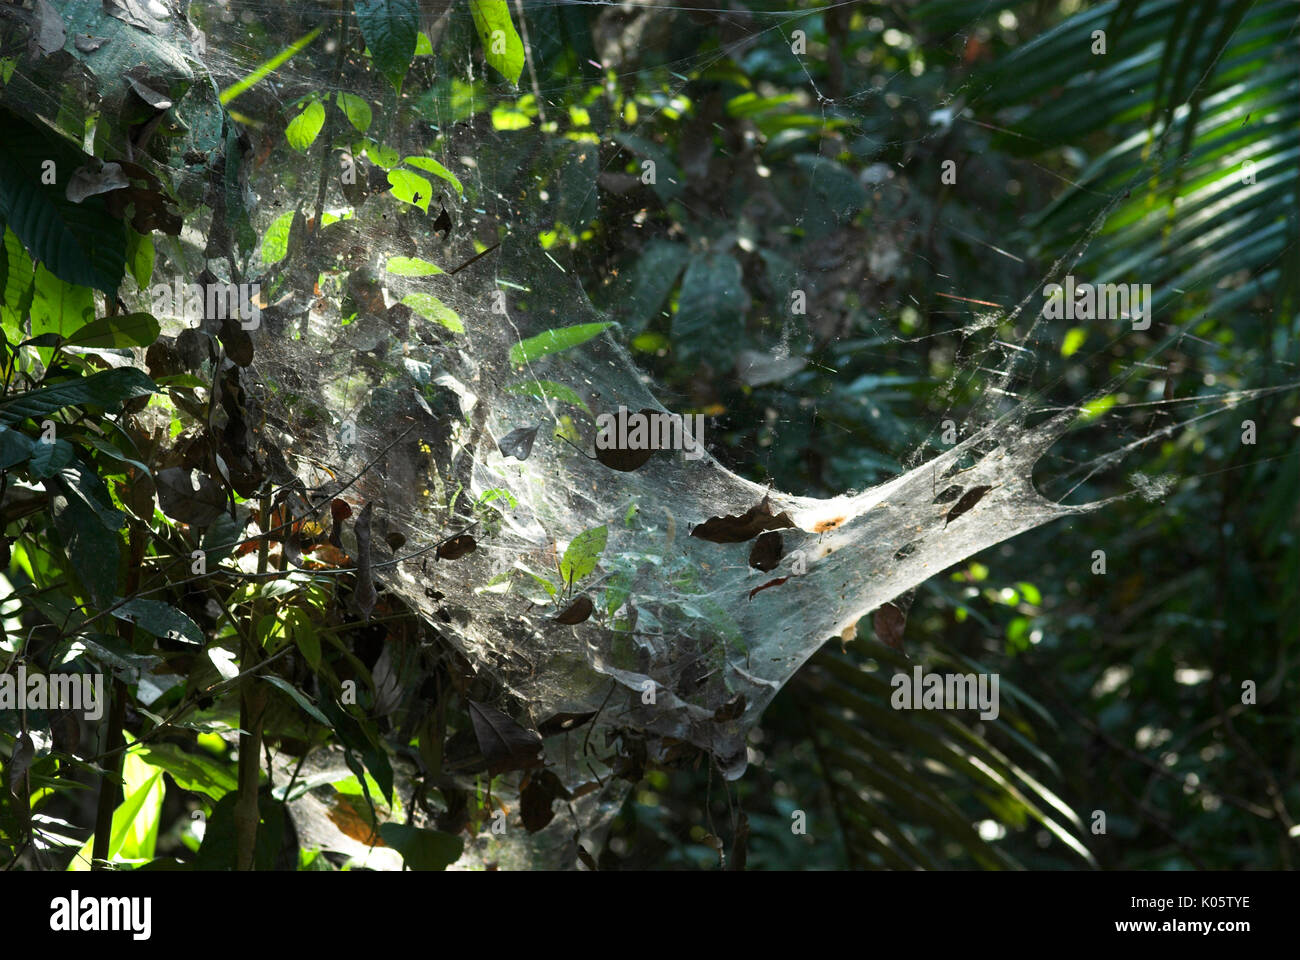 Communal Spiders on web, possibly Anelosimus eximius sp., Manu Peru, group, small, work together, amazon, jungle Stock Photo